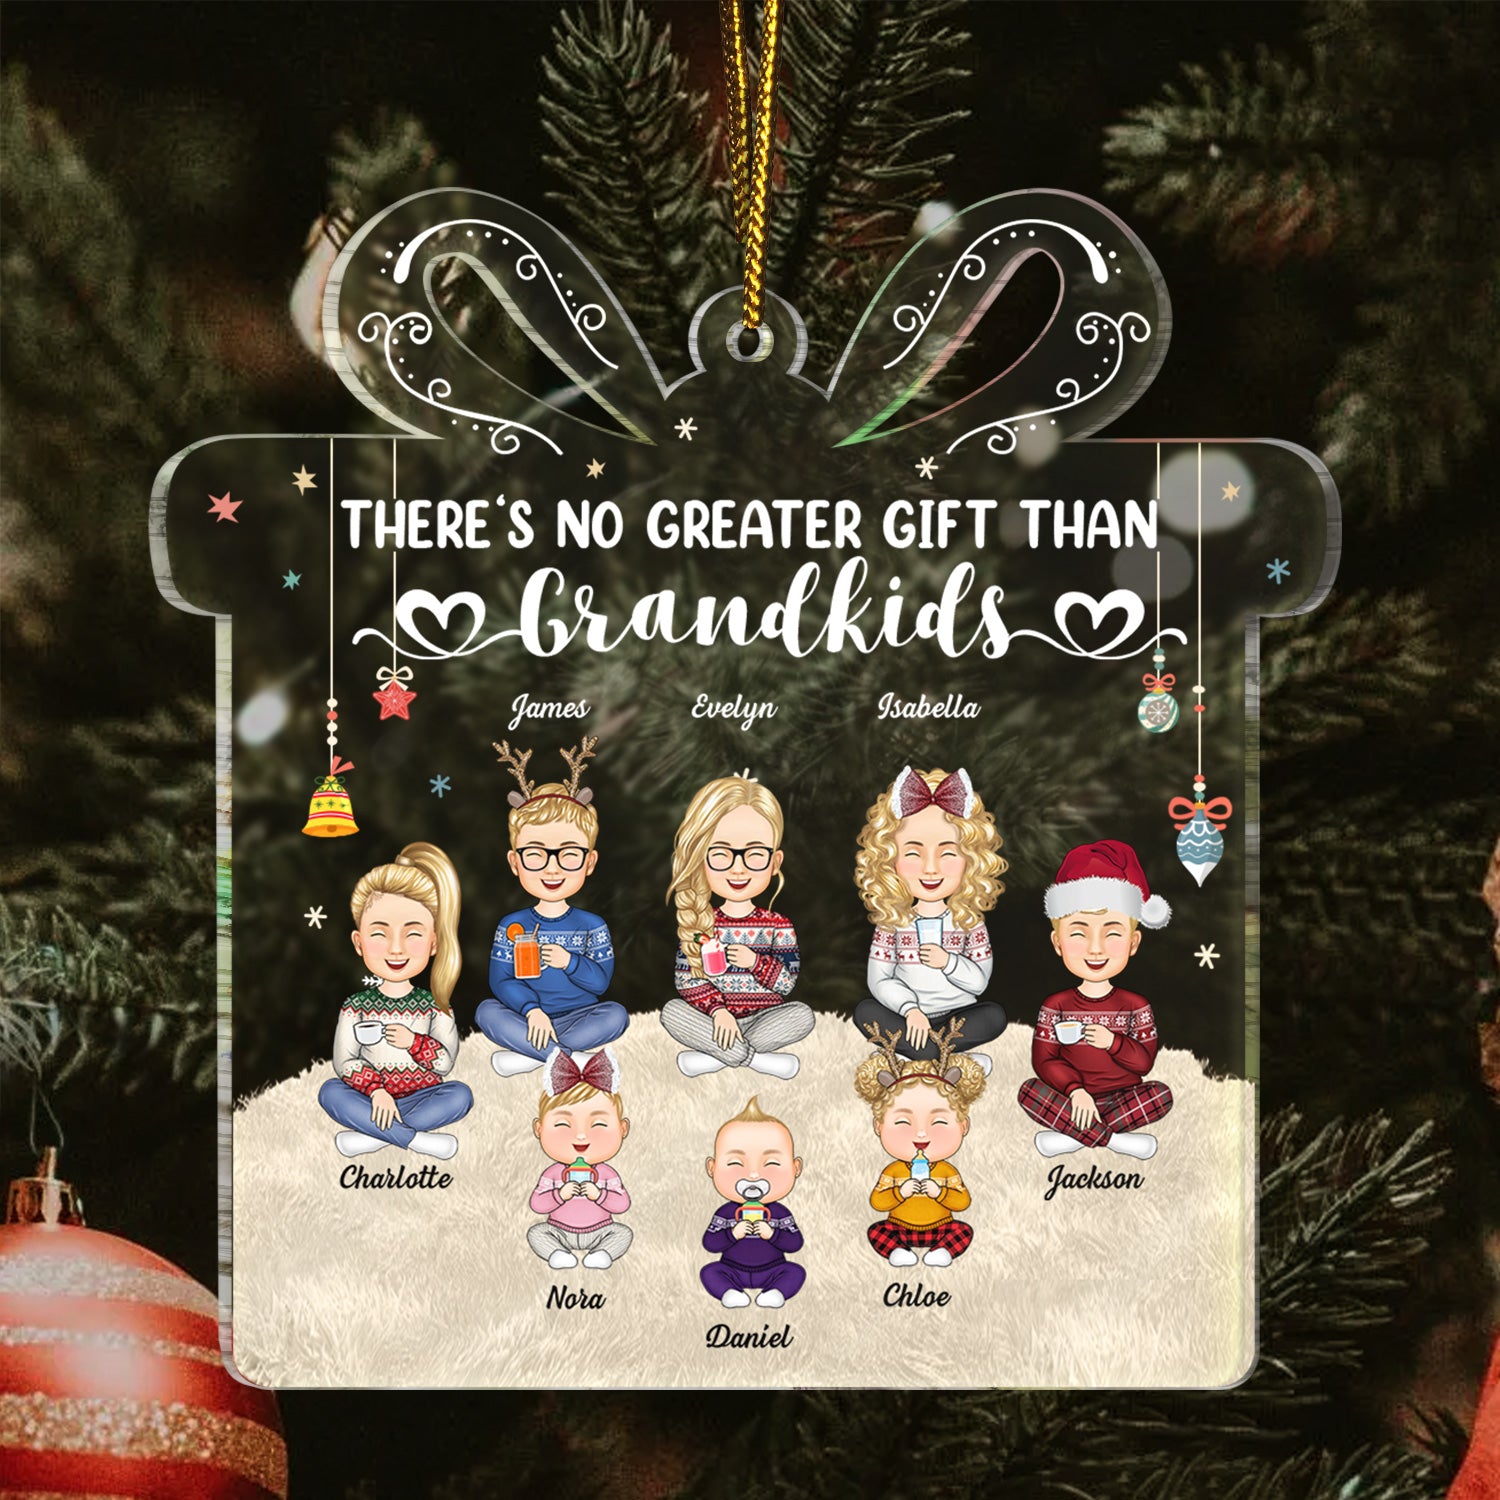 There's No Greater Gift Than Grandkids - Christmas Gift For Family, Grandma, Grandpa, Grandparents - Personalized Custom Shaped Acrylic Ornament